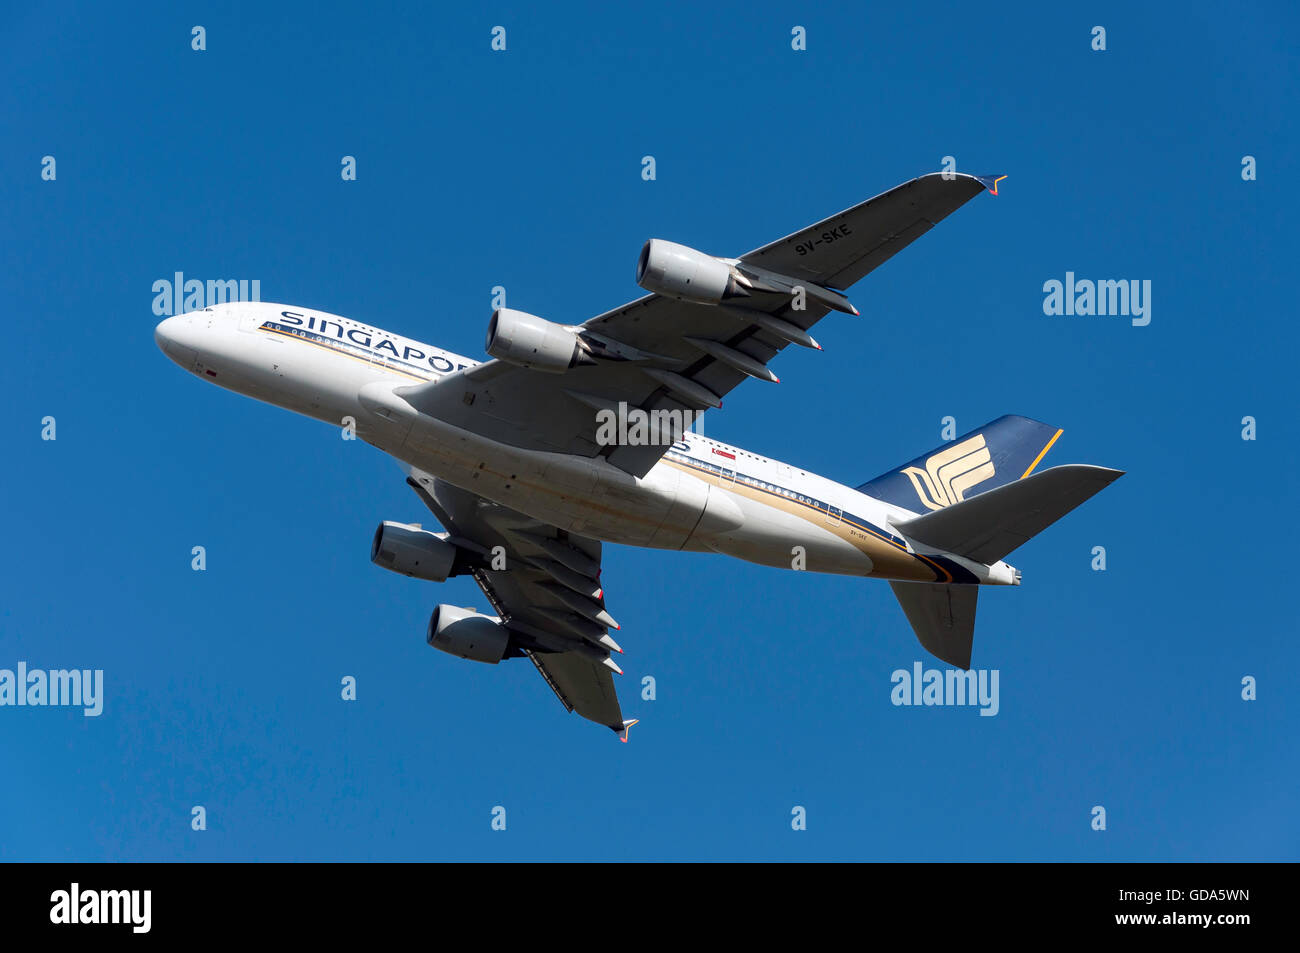 Singapore Airlines Airbus A380 taking off from Heathrow Airport, Greater London, England, United Kingdom Stock Photo